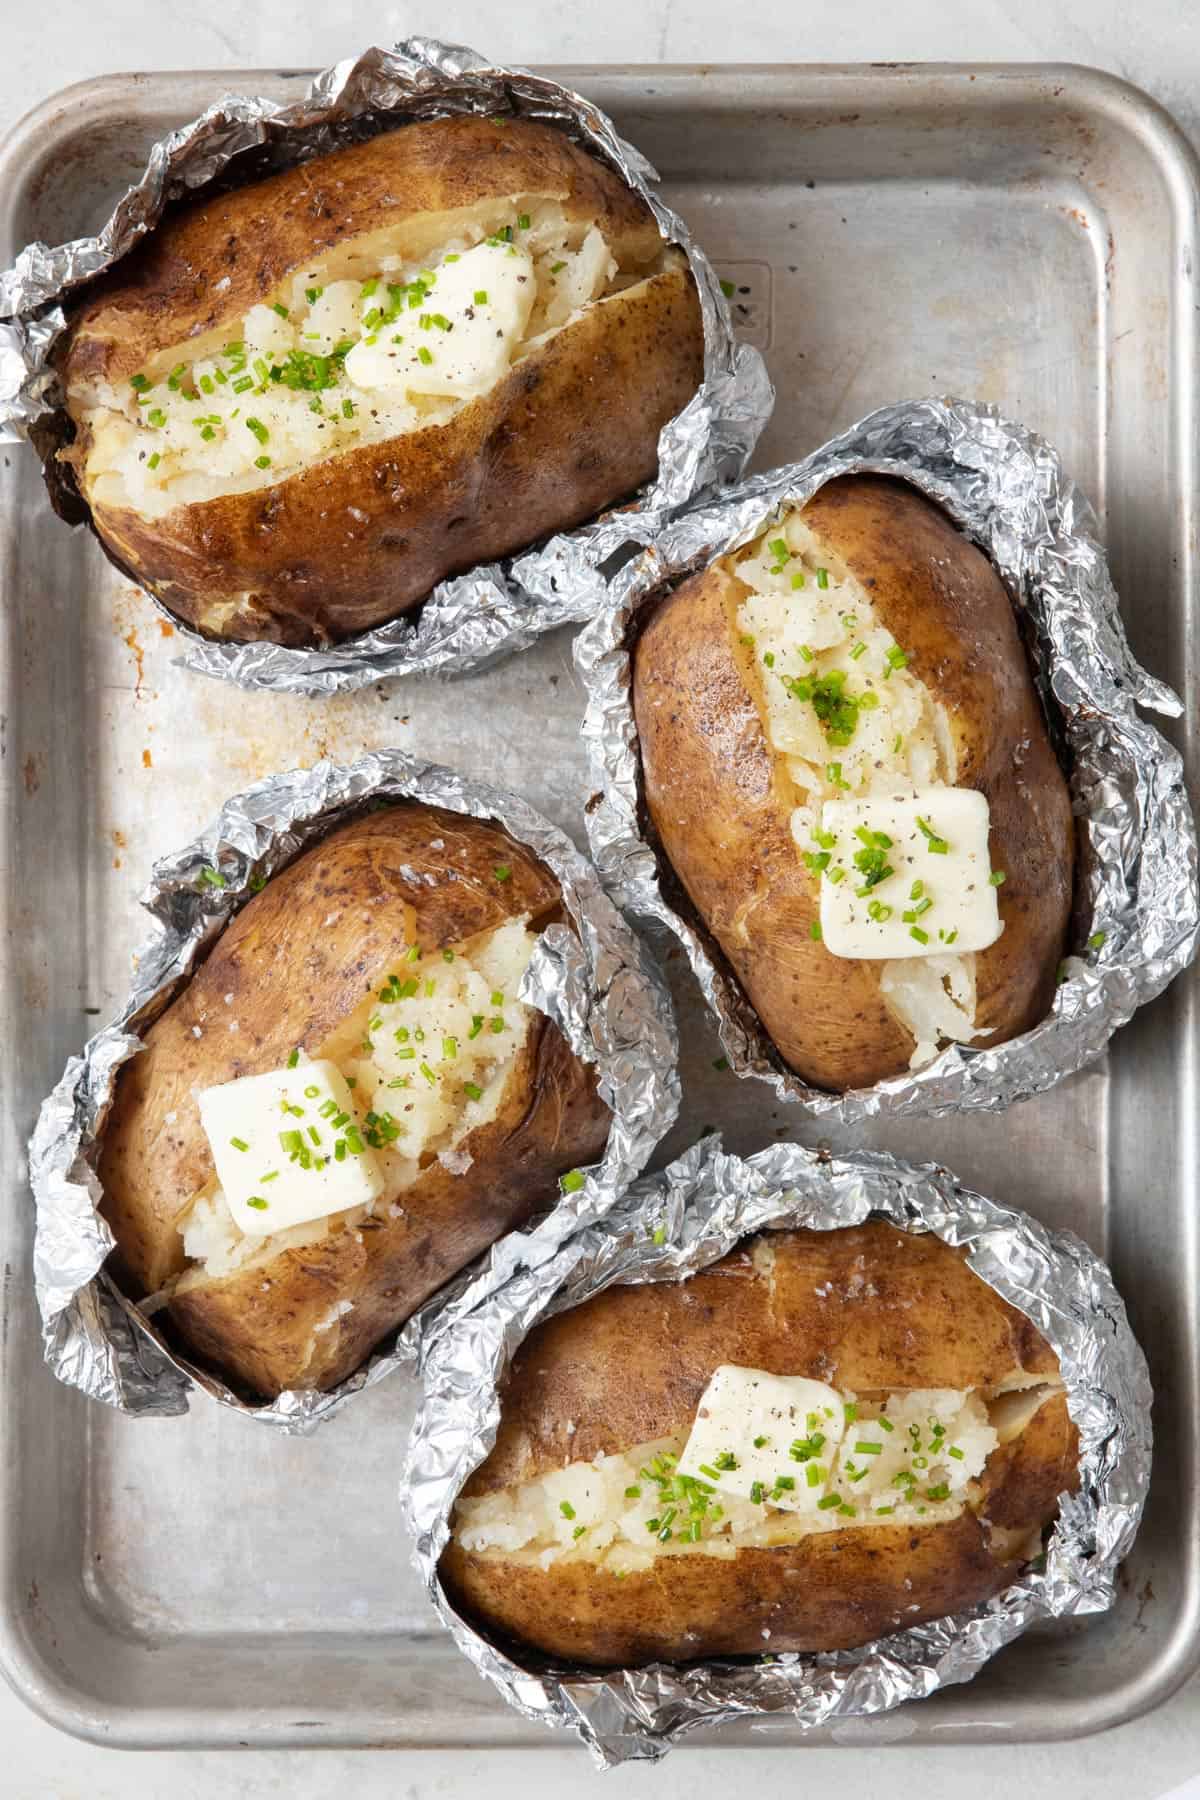 4 baked potatoes in foil split open and fluffed with a pat on butter on each and garnished with chopped chives and salt.